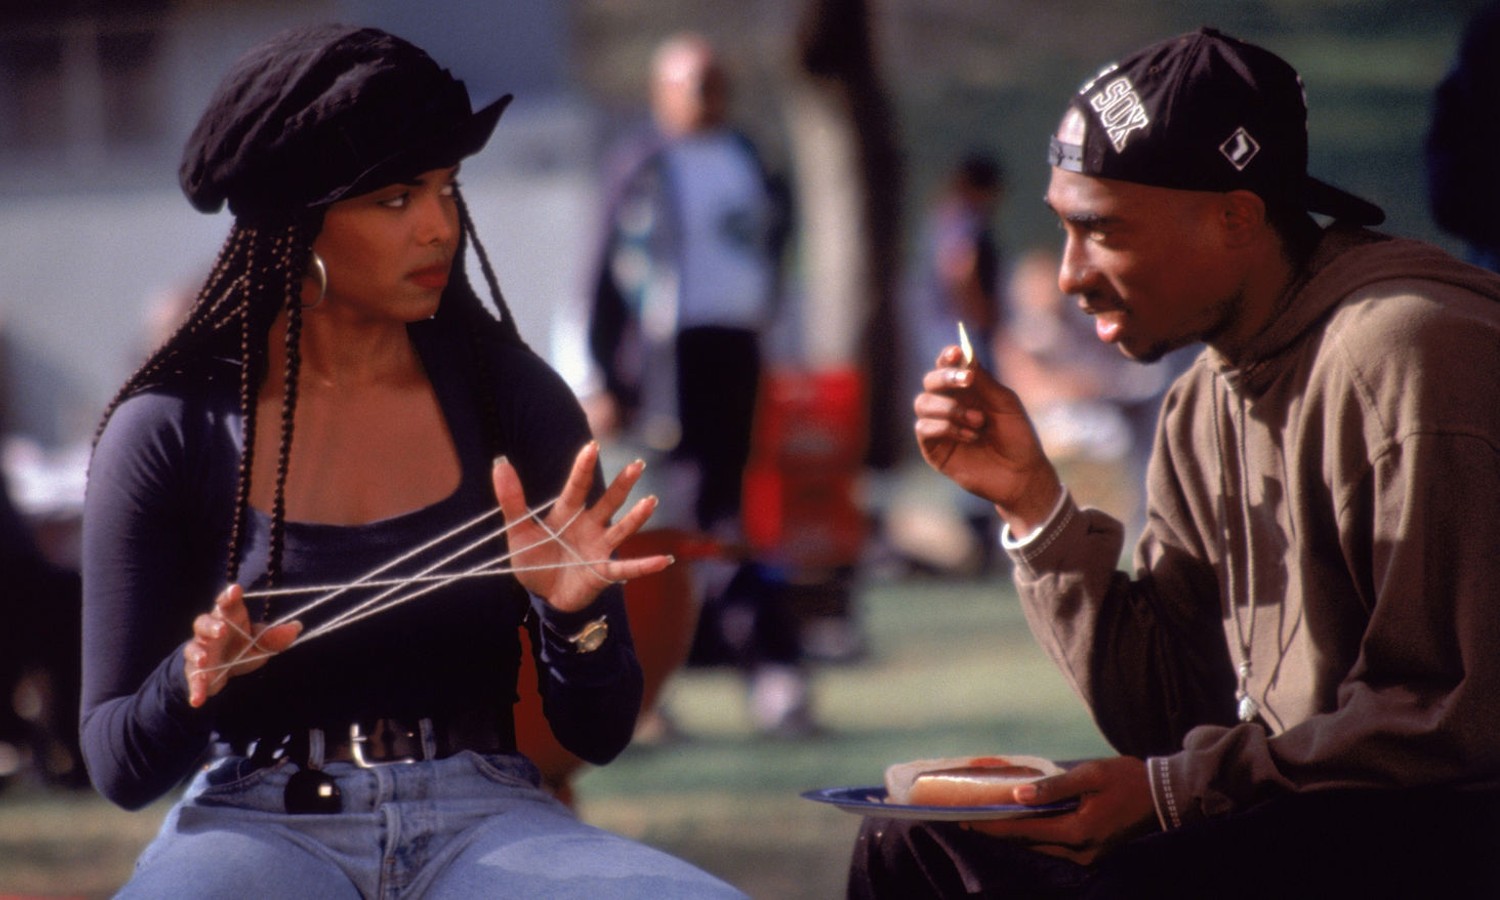 Image from the motion picture Poetic Justice